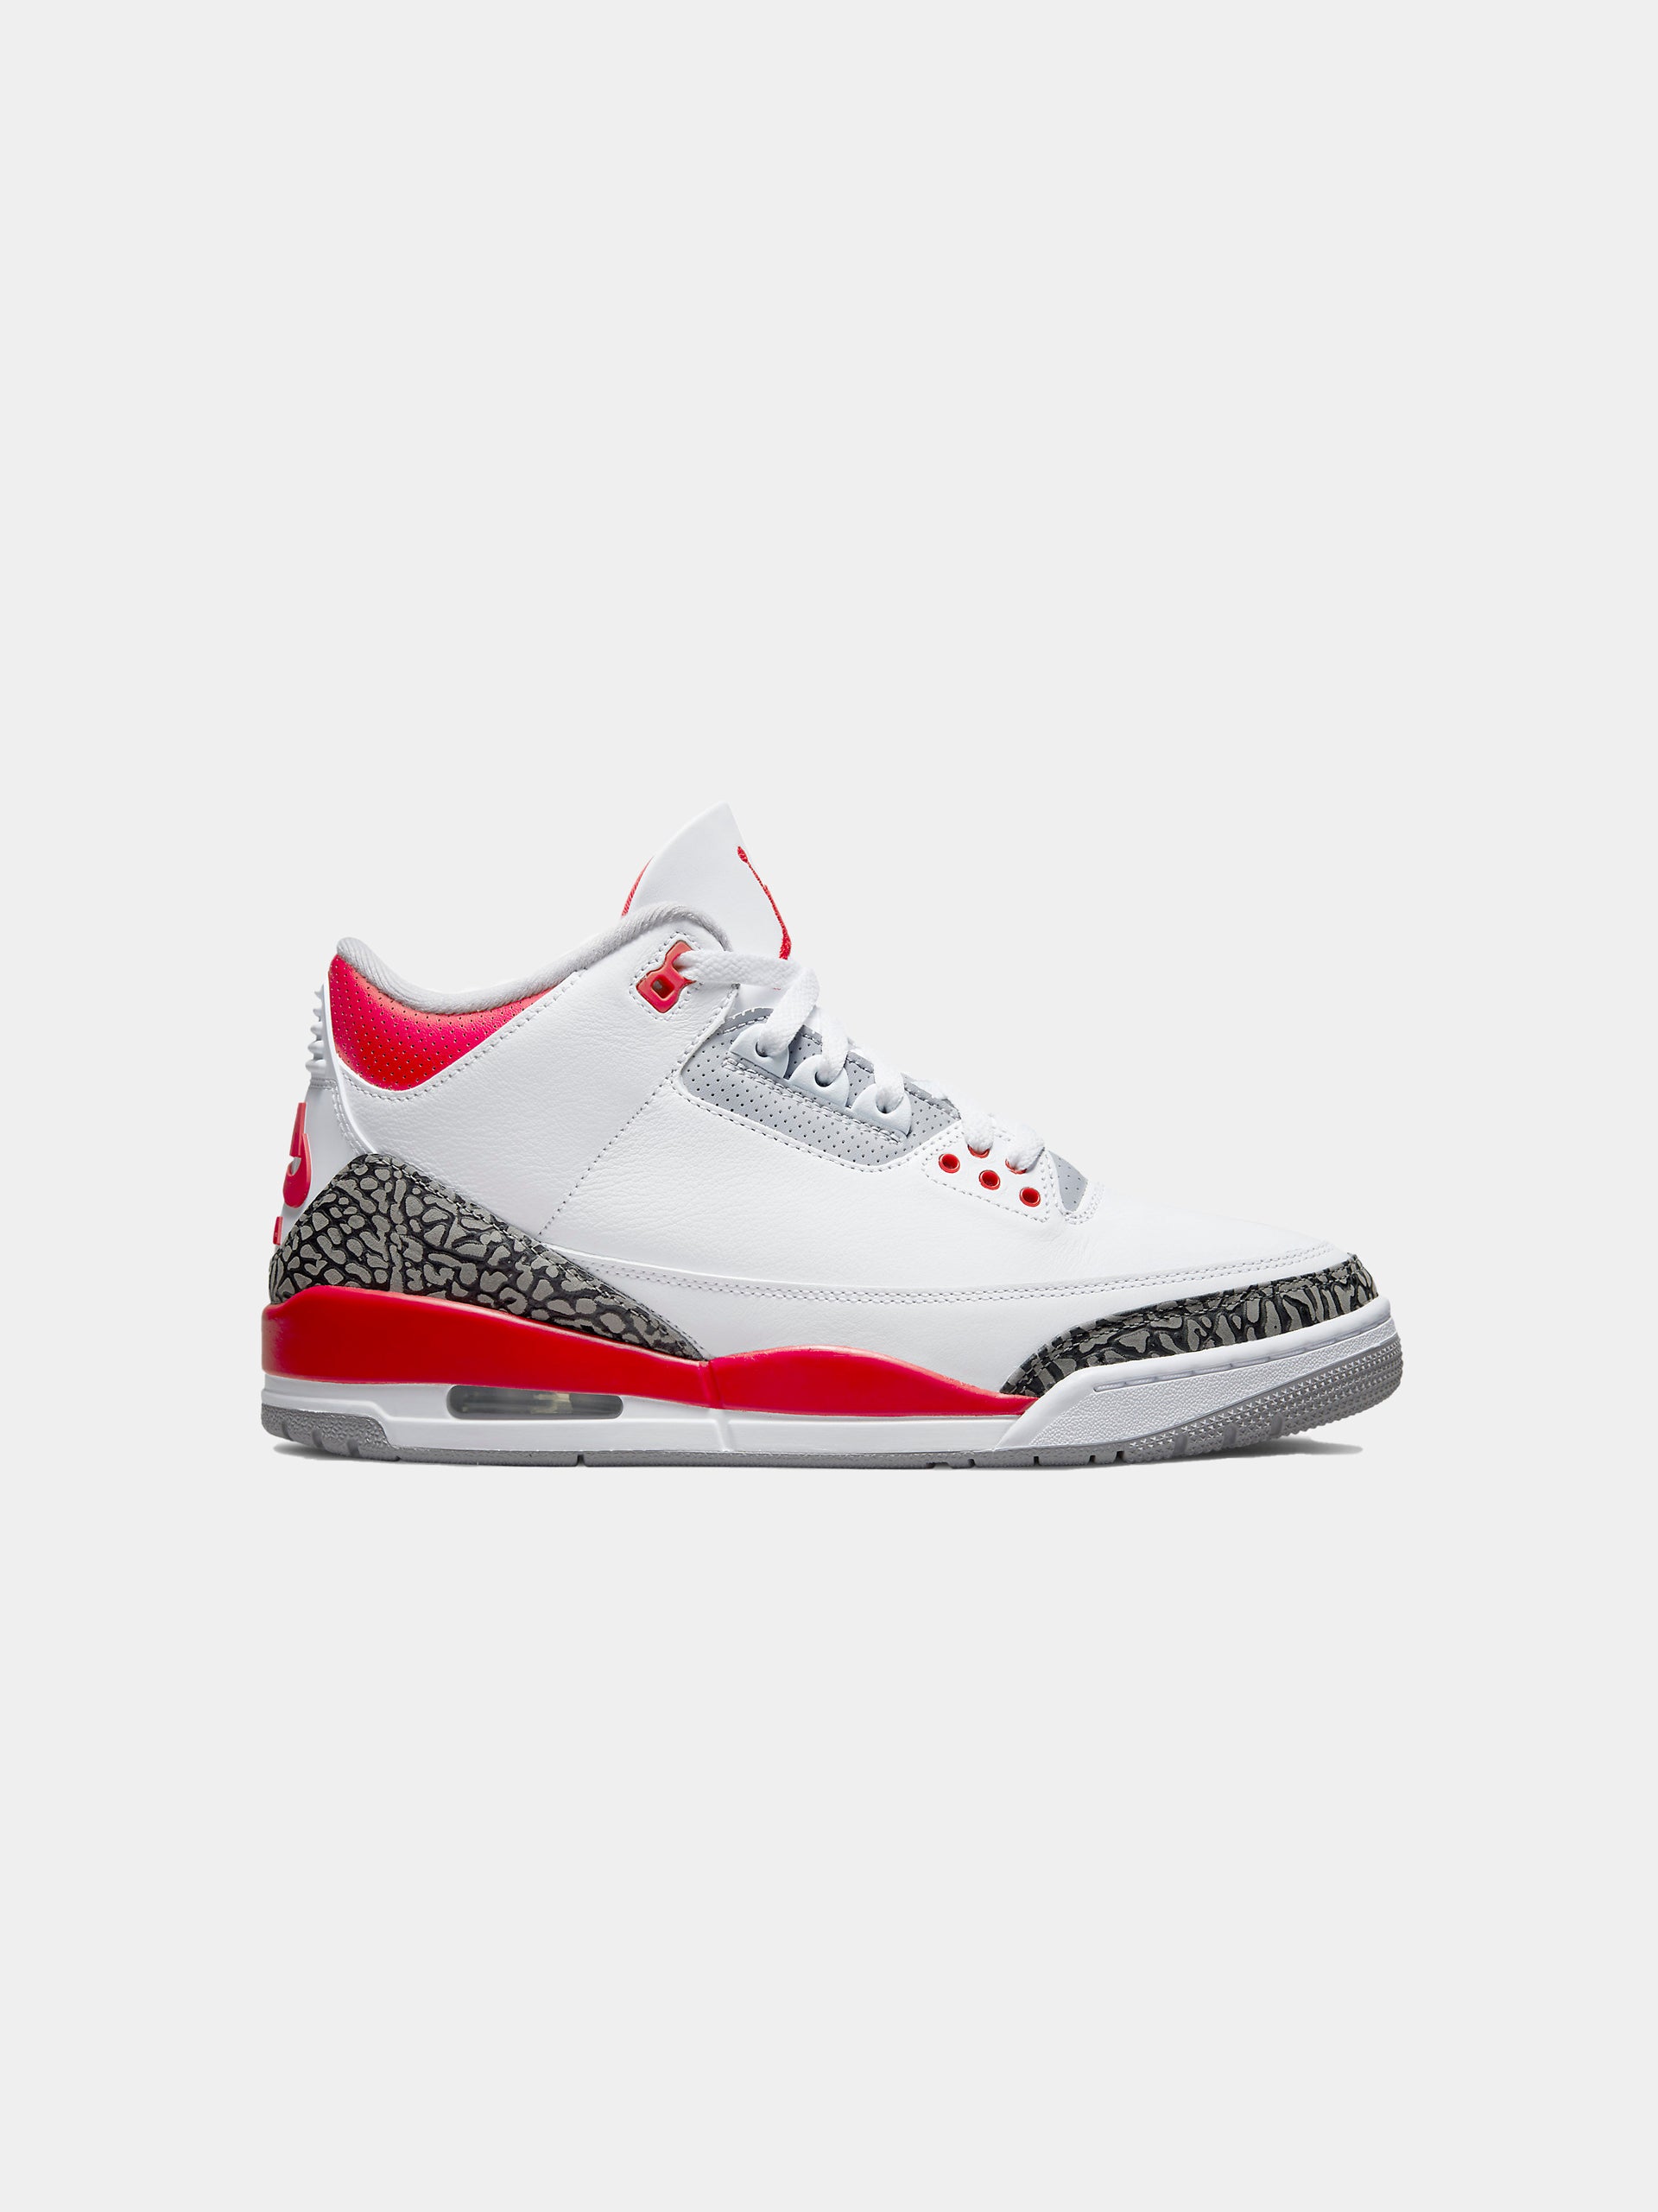 YOUTH AIR JORDAN 3 RETRO  (White/Fire Red-Black-Cement Grey)